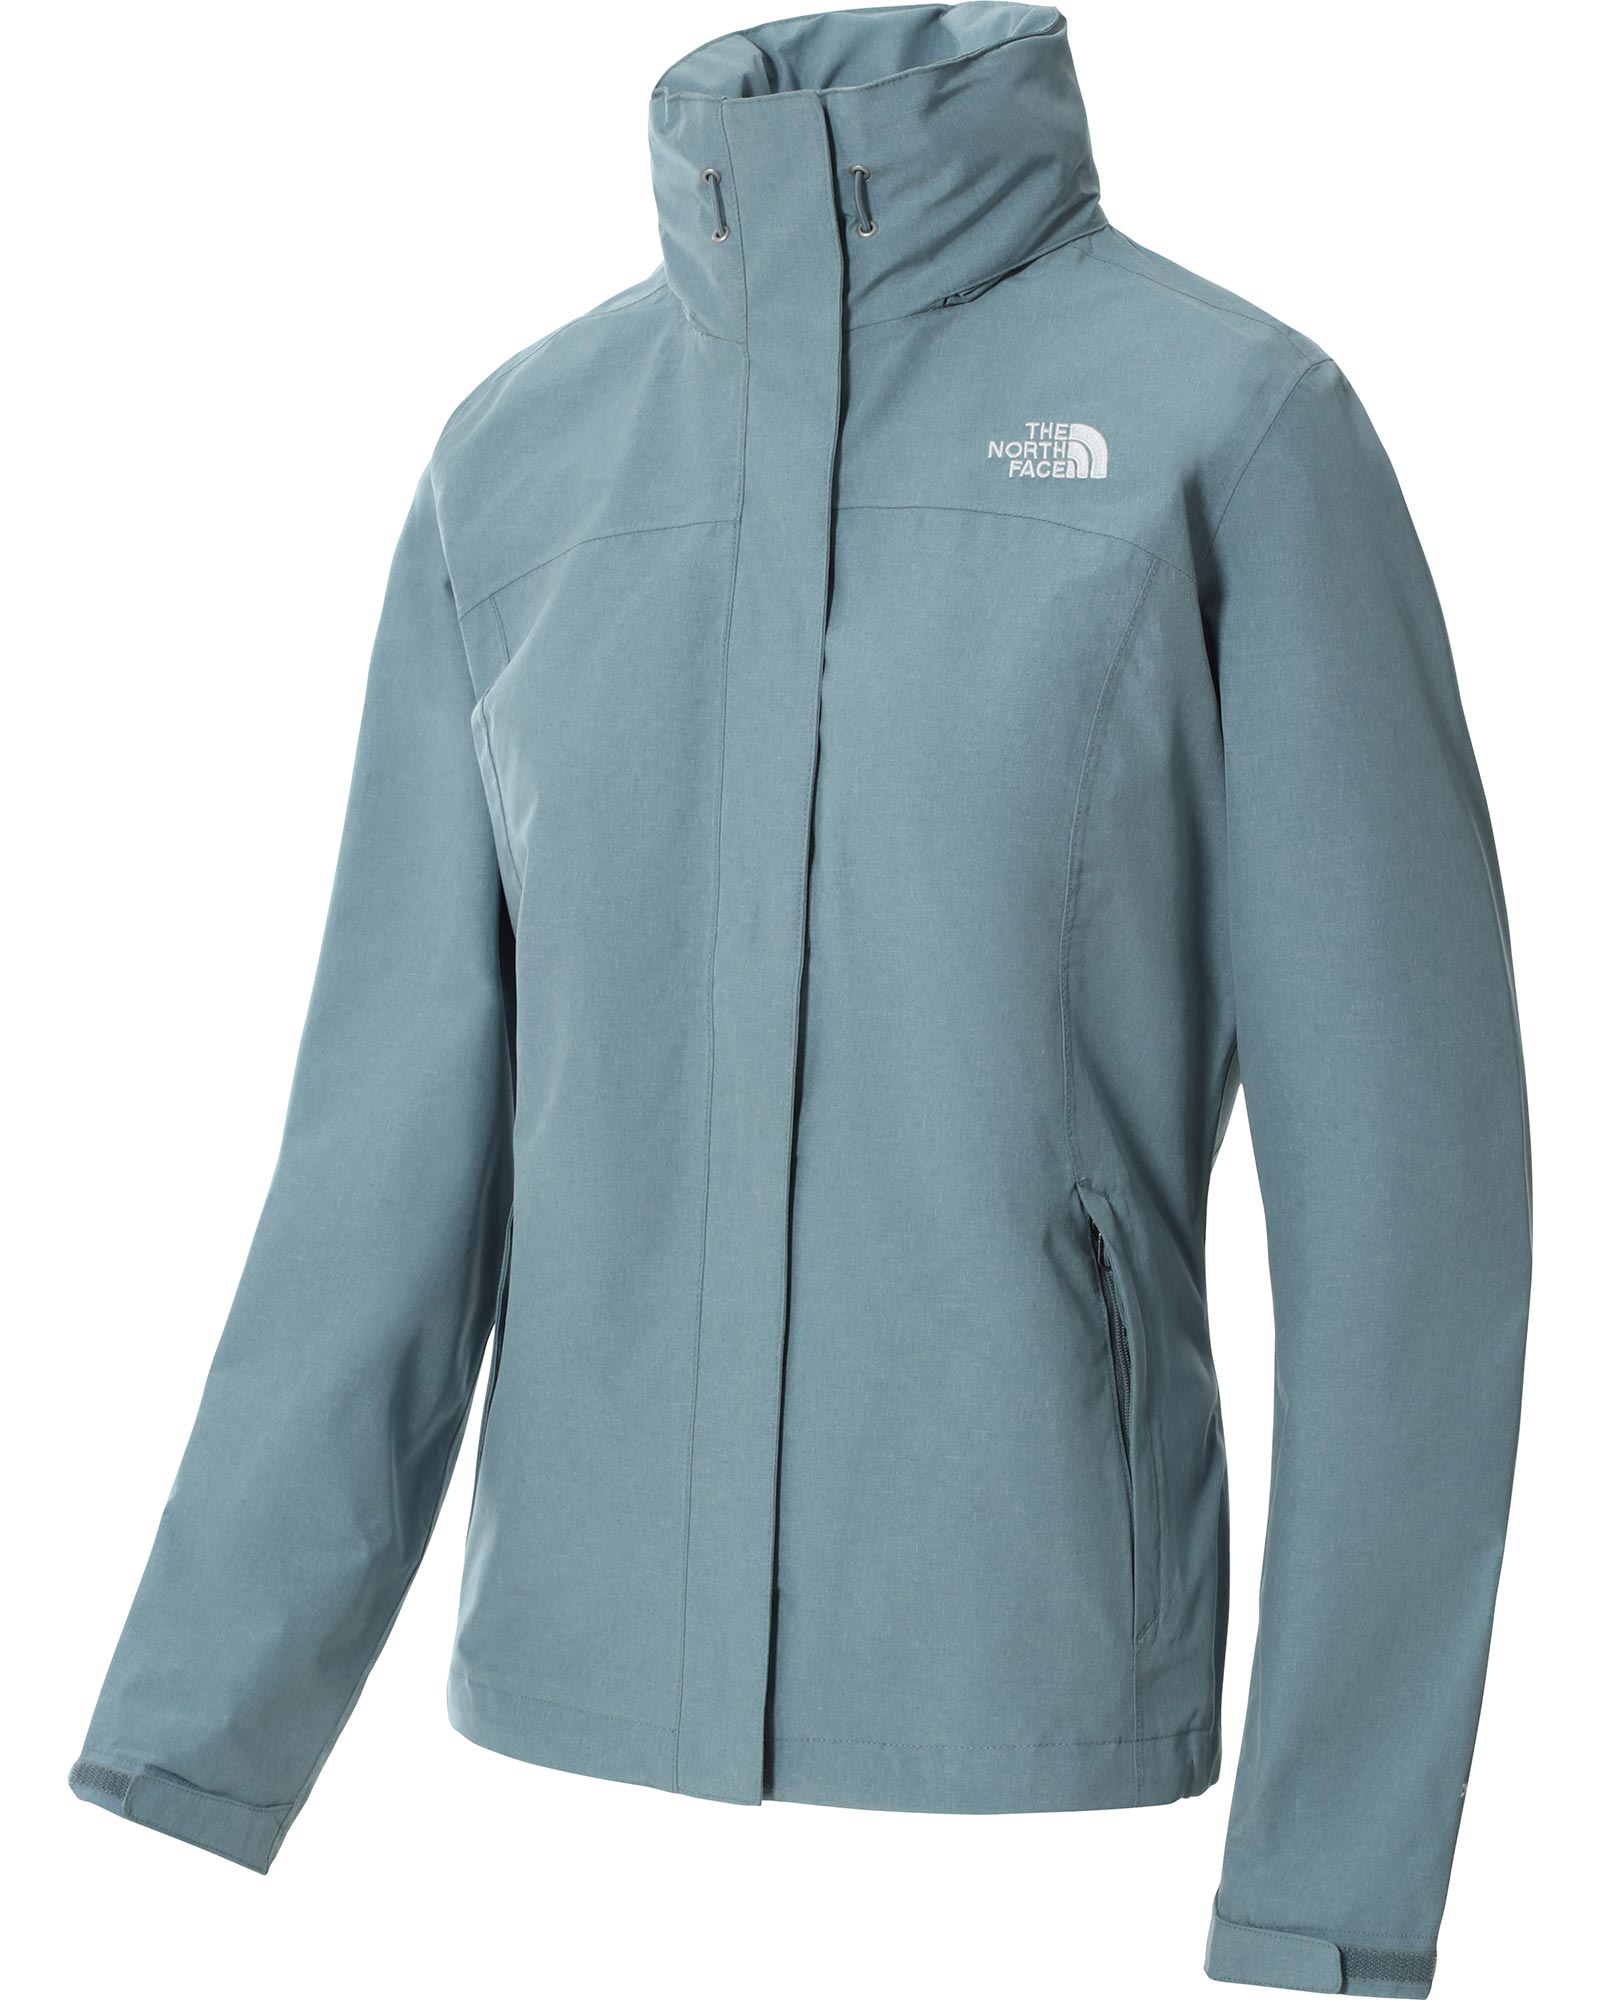 The North Face Sangro DryVent Women’s Jacket - Goblin Blue Heather S